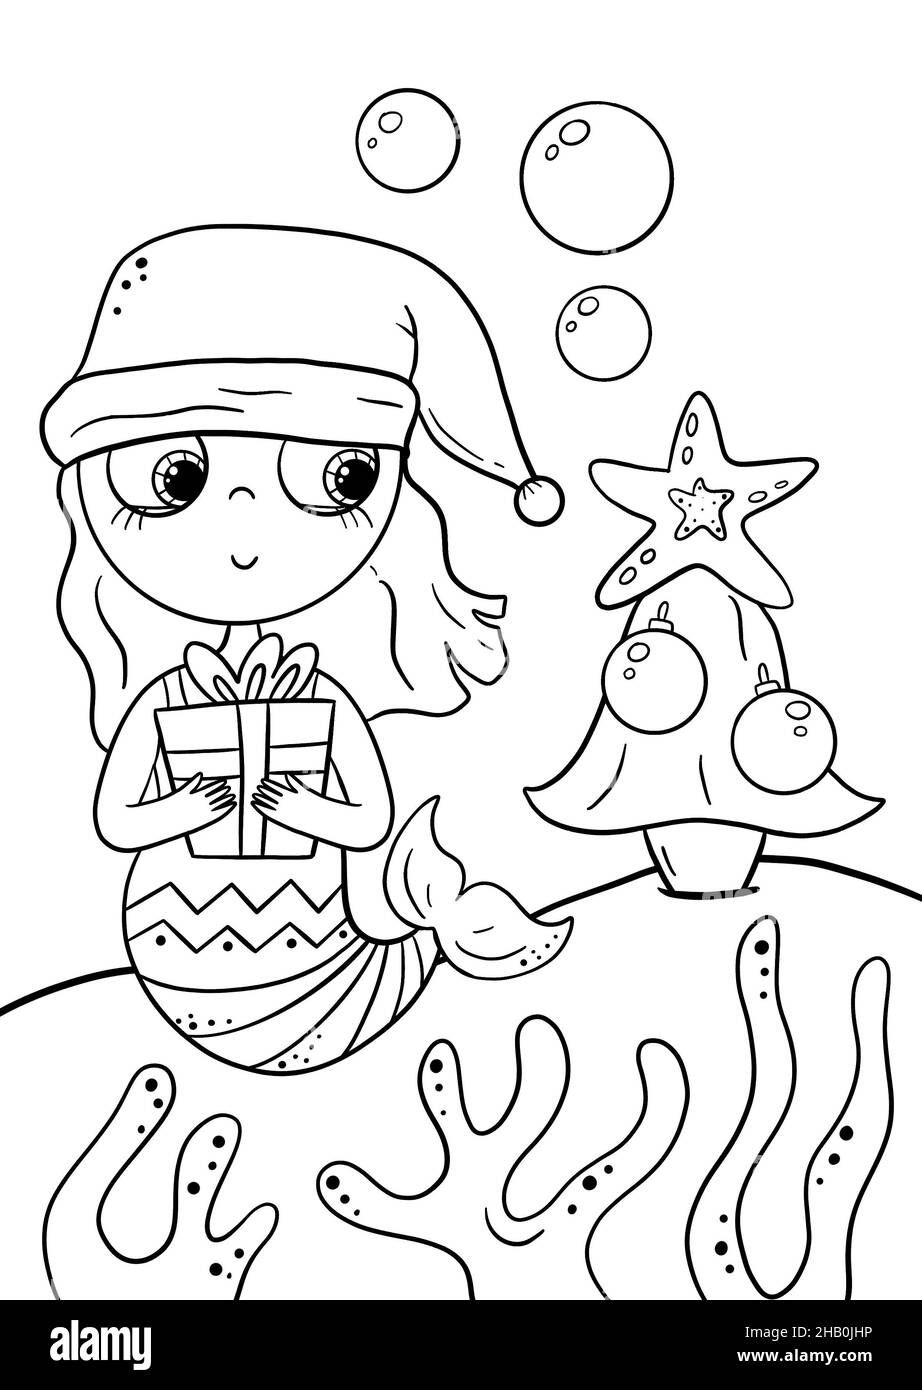 Cute little mermaid celebrate Christmas, Coloring book page for kids. Collection of design element, outline, kawaii anime chibi style. Stock Photo